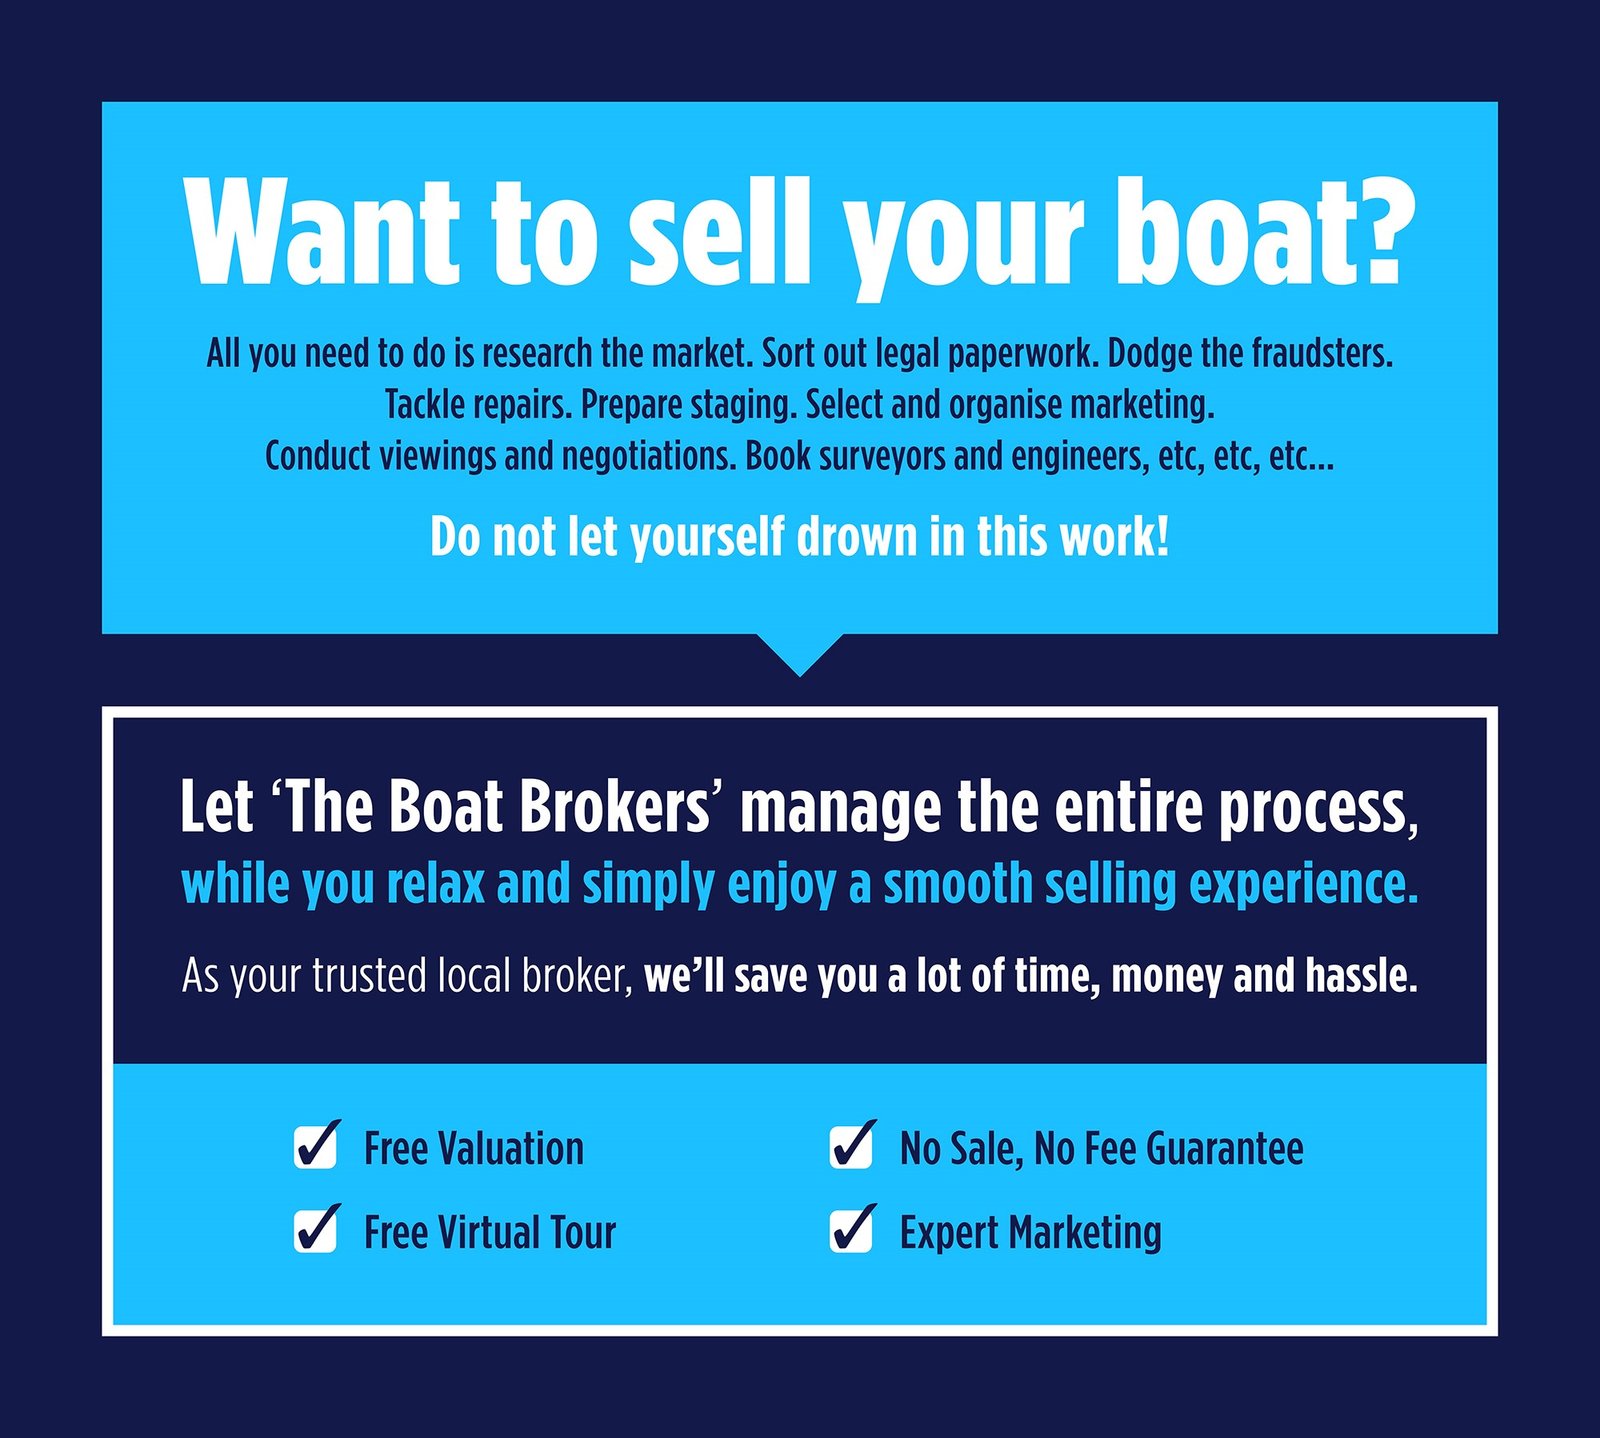 Want to sell your boat